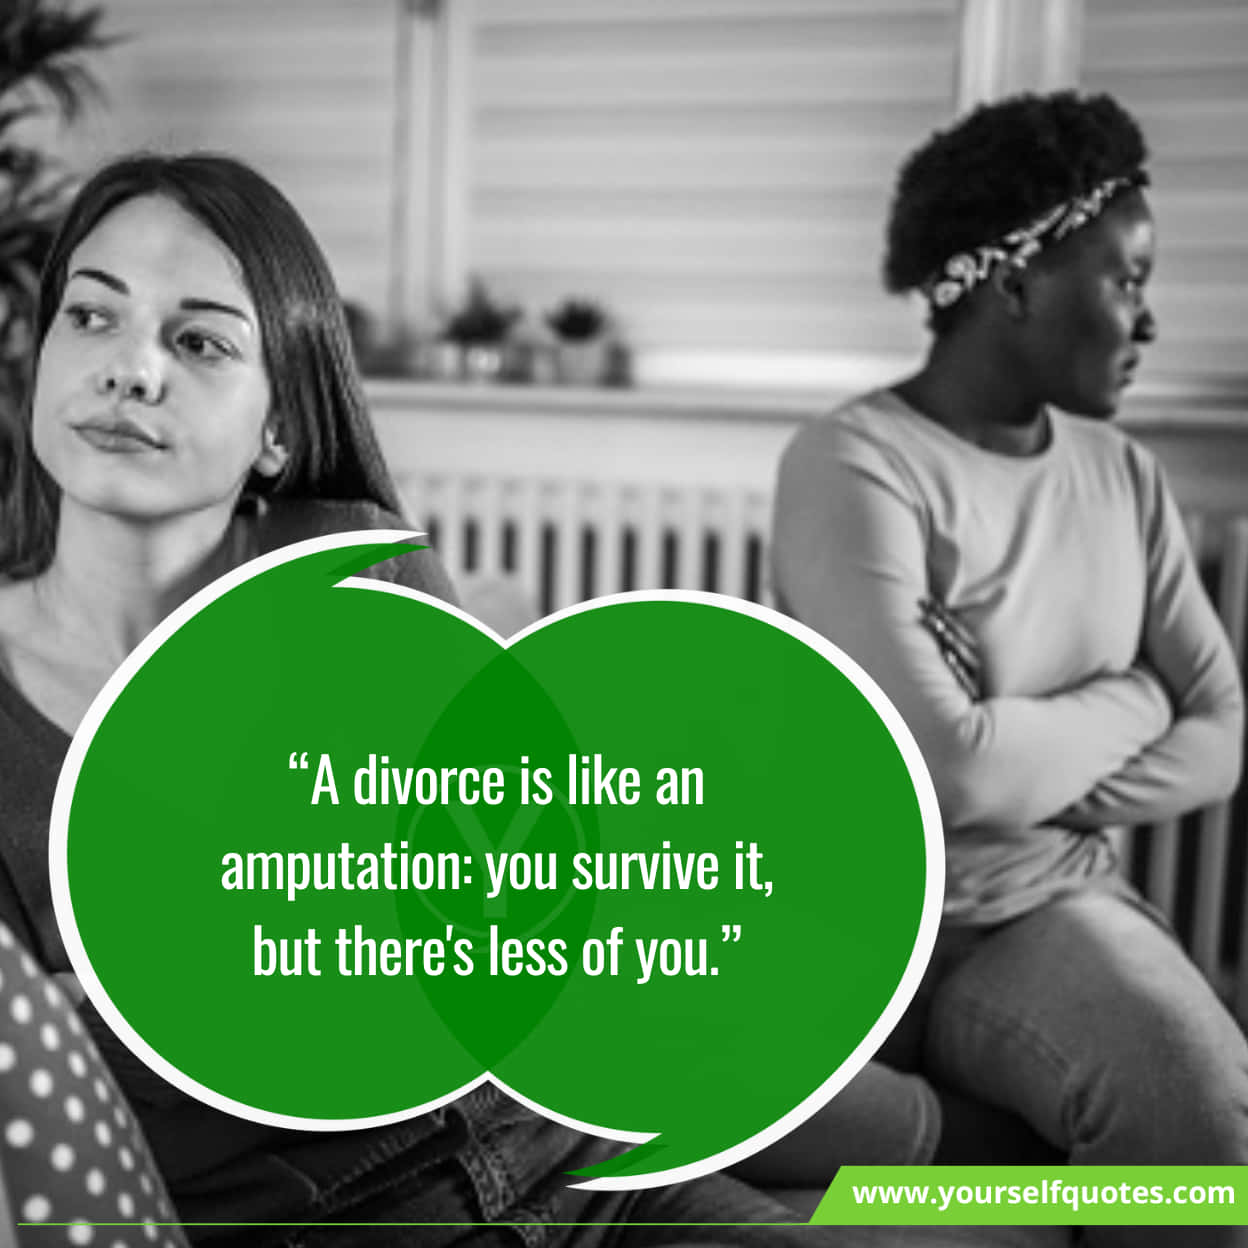 Best Inspiring Quotes About Divorce